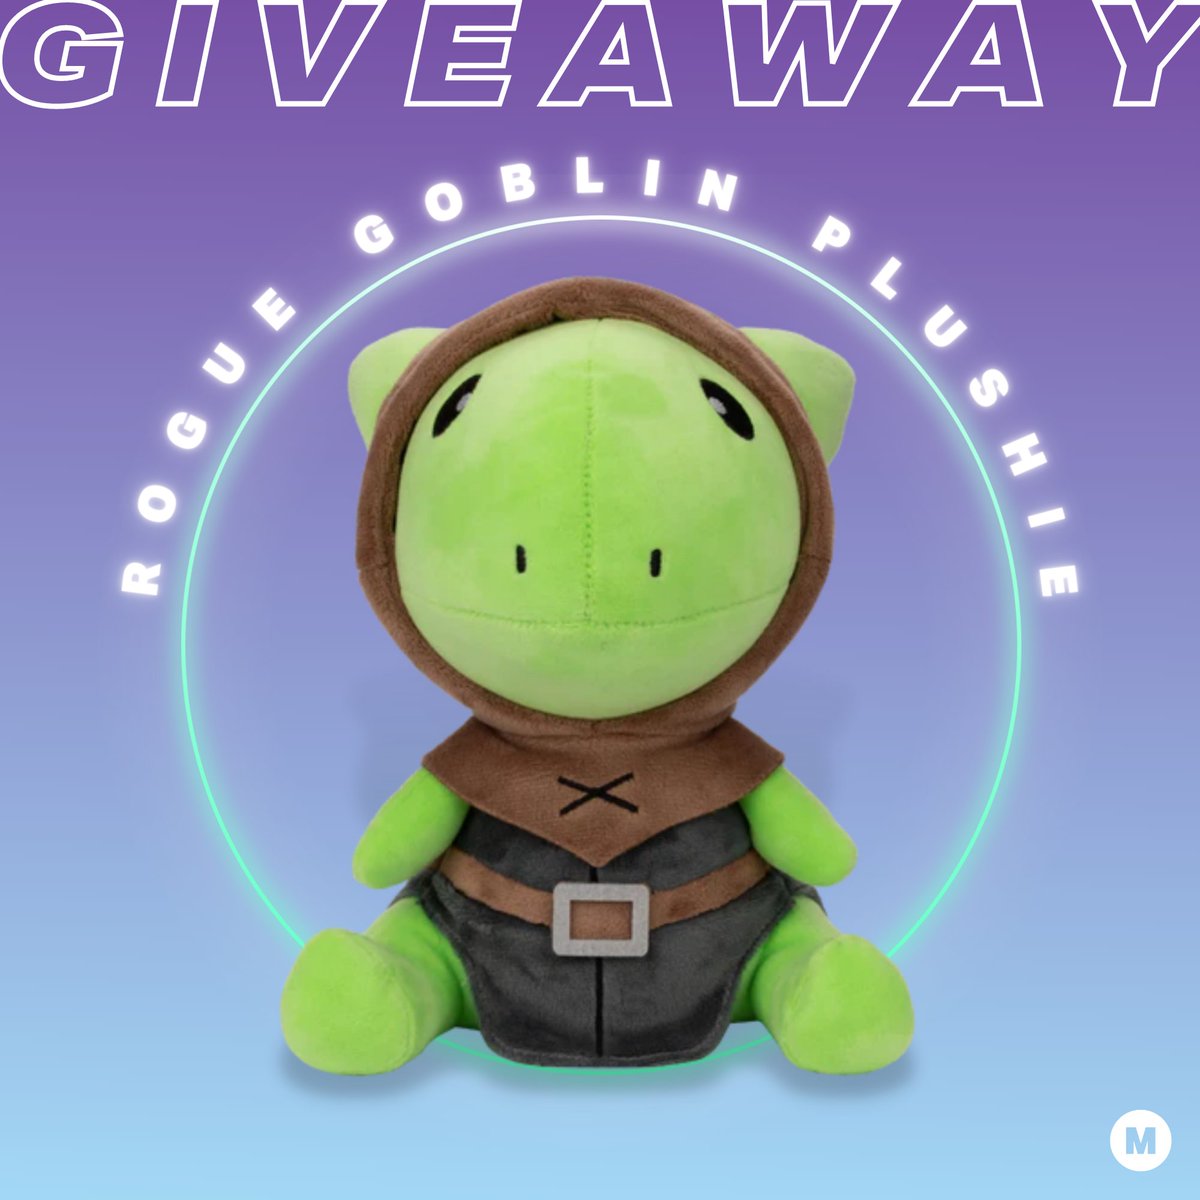 doing a special giveaway where 2 lucky peeps will win a rogue gobbo plush! how to enter: 1) Follow me and also @Makeship 2) retweet this post contest ends July 22nd at 6pm GMT